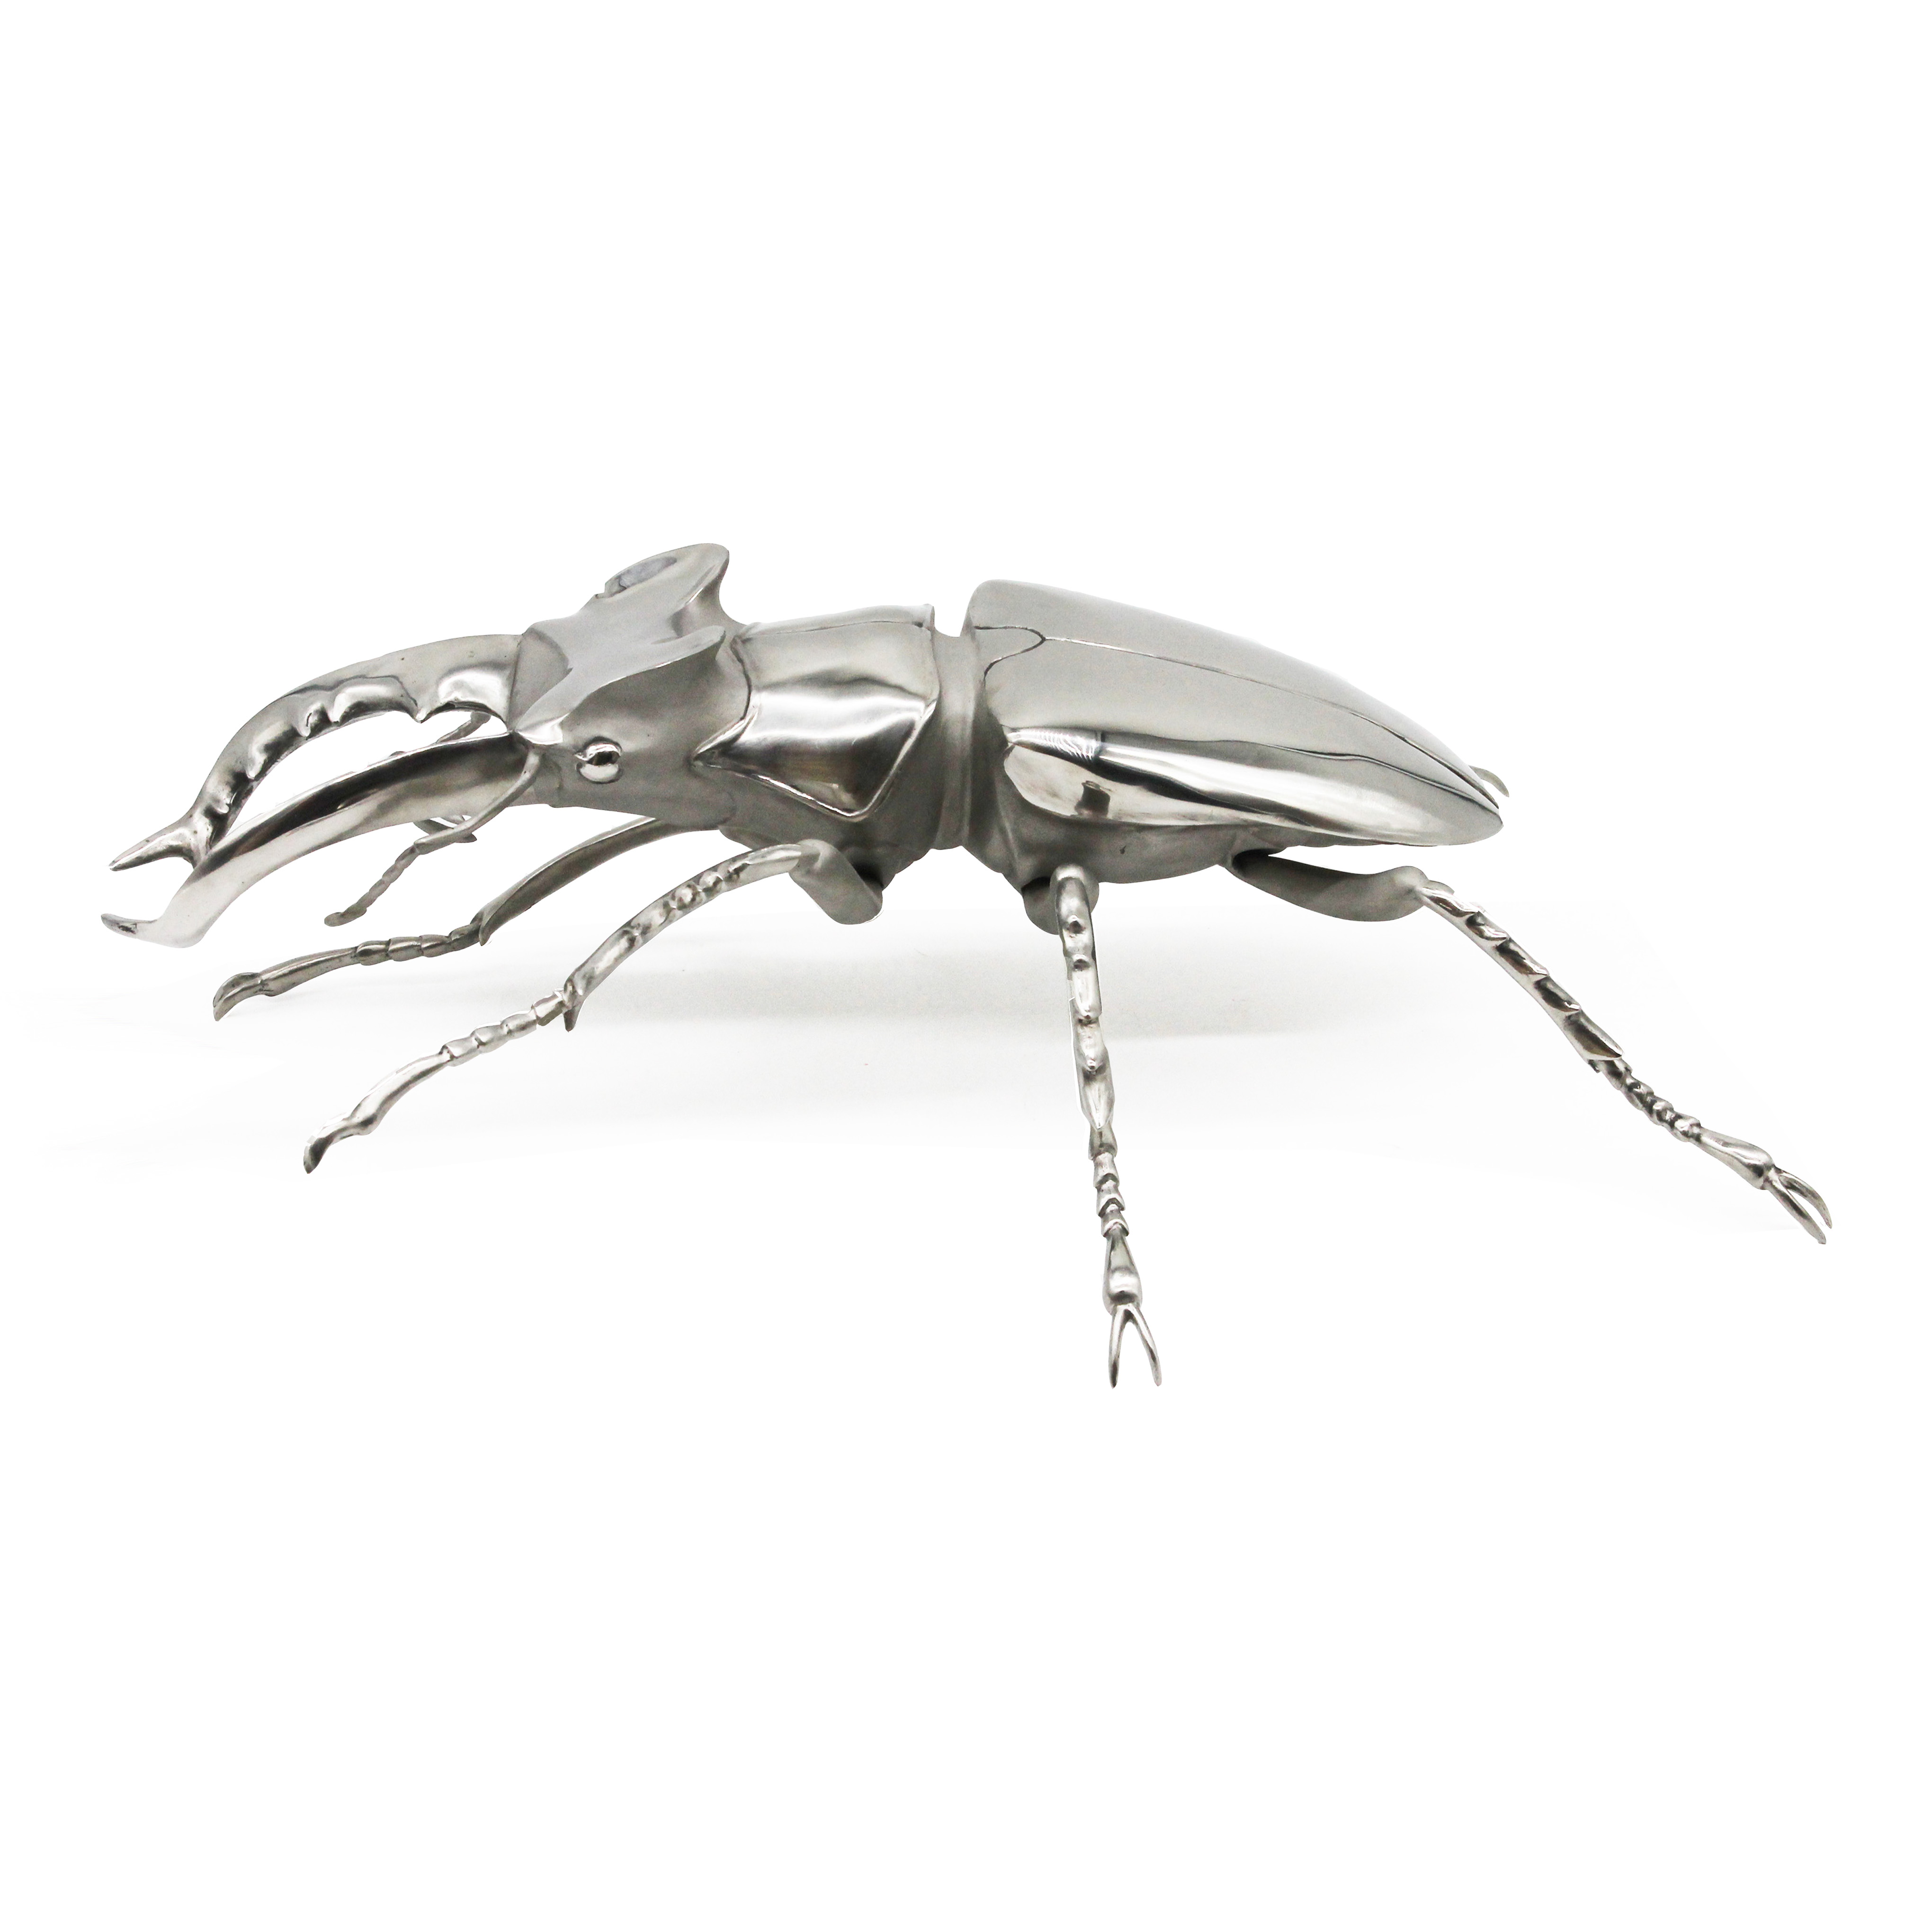 Anne Pierce; Stag Beetle Stainless Steel, 2021, Original Sculpture Steel, 20 x 6 inches. Artwork description: 241 The stag beetle is one of central characters in a collection that depicts a fictional world of grander than life size insects.  In my fictional world the relative size of these creatures is reversed, and they co- exist in peaceful harmony.  While the stag beetles often provide ...